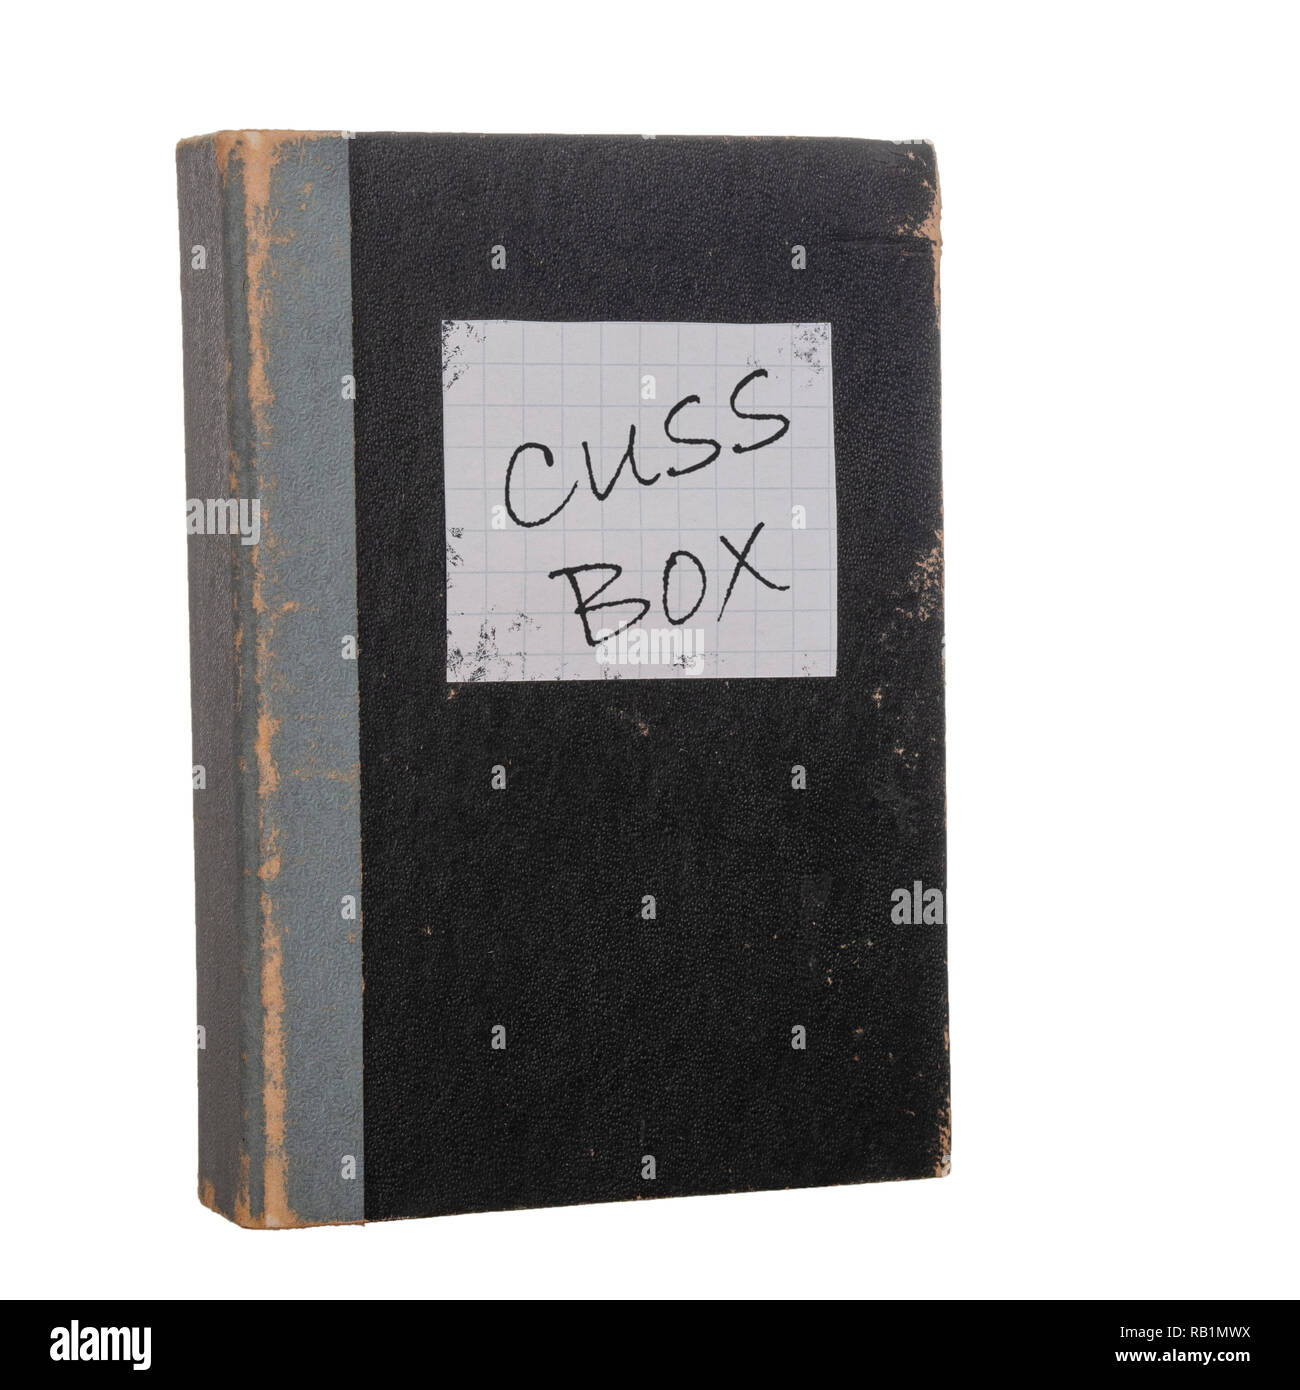 Vintage cuss box, isolated on white background. New Year Resolution maybe. Stock Photo